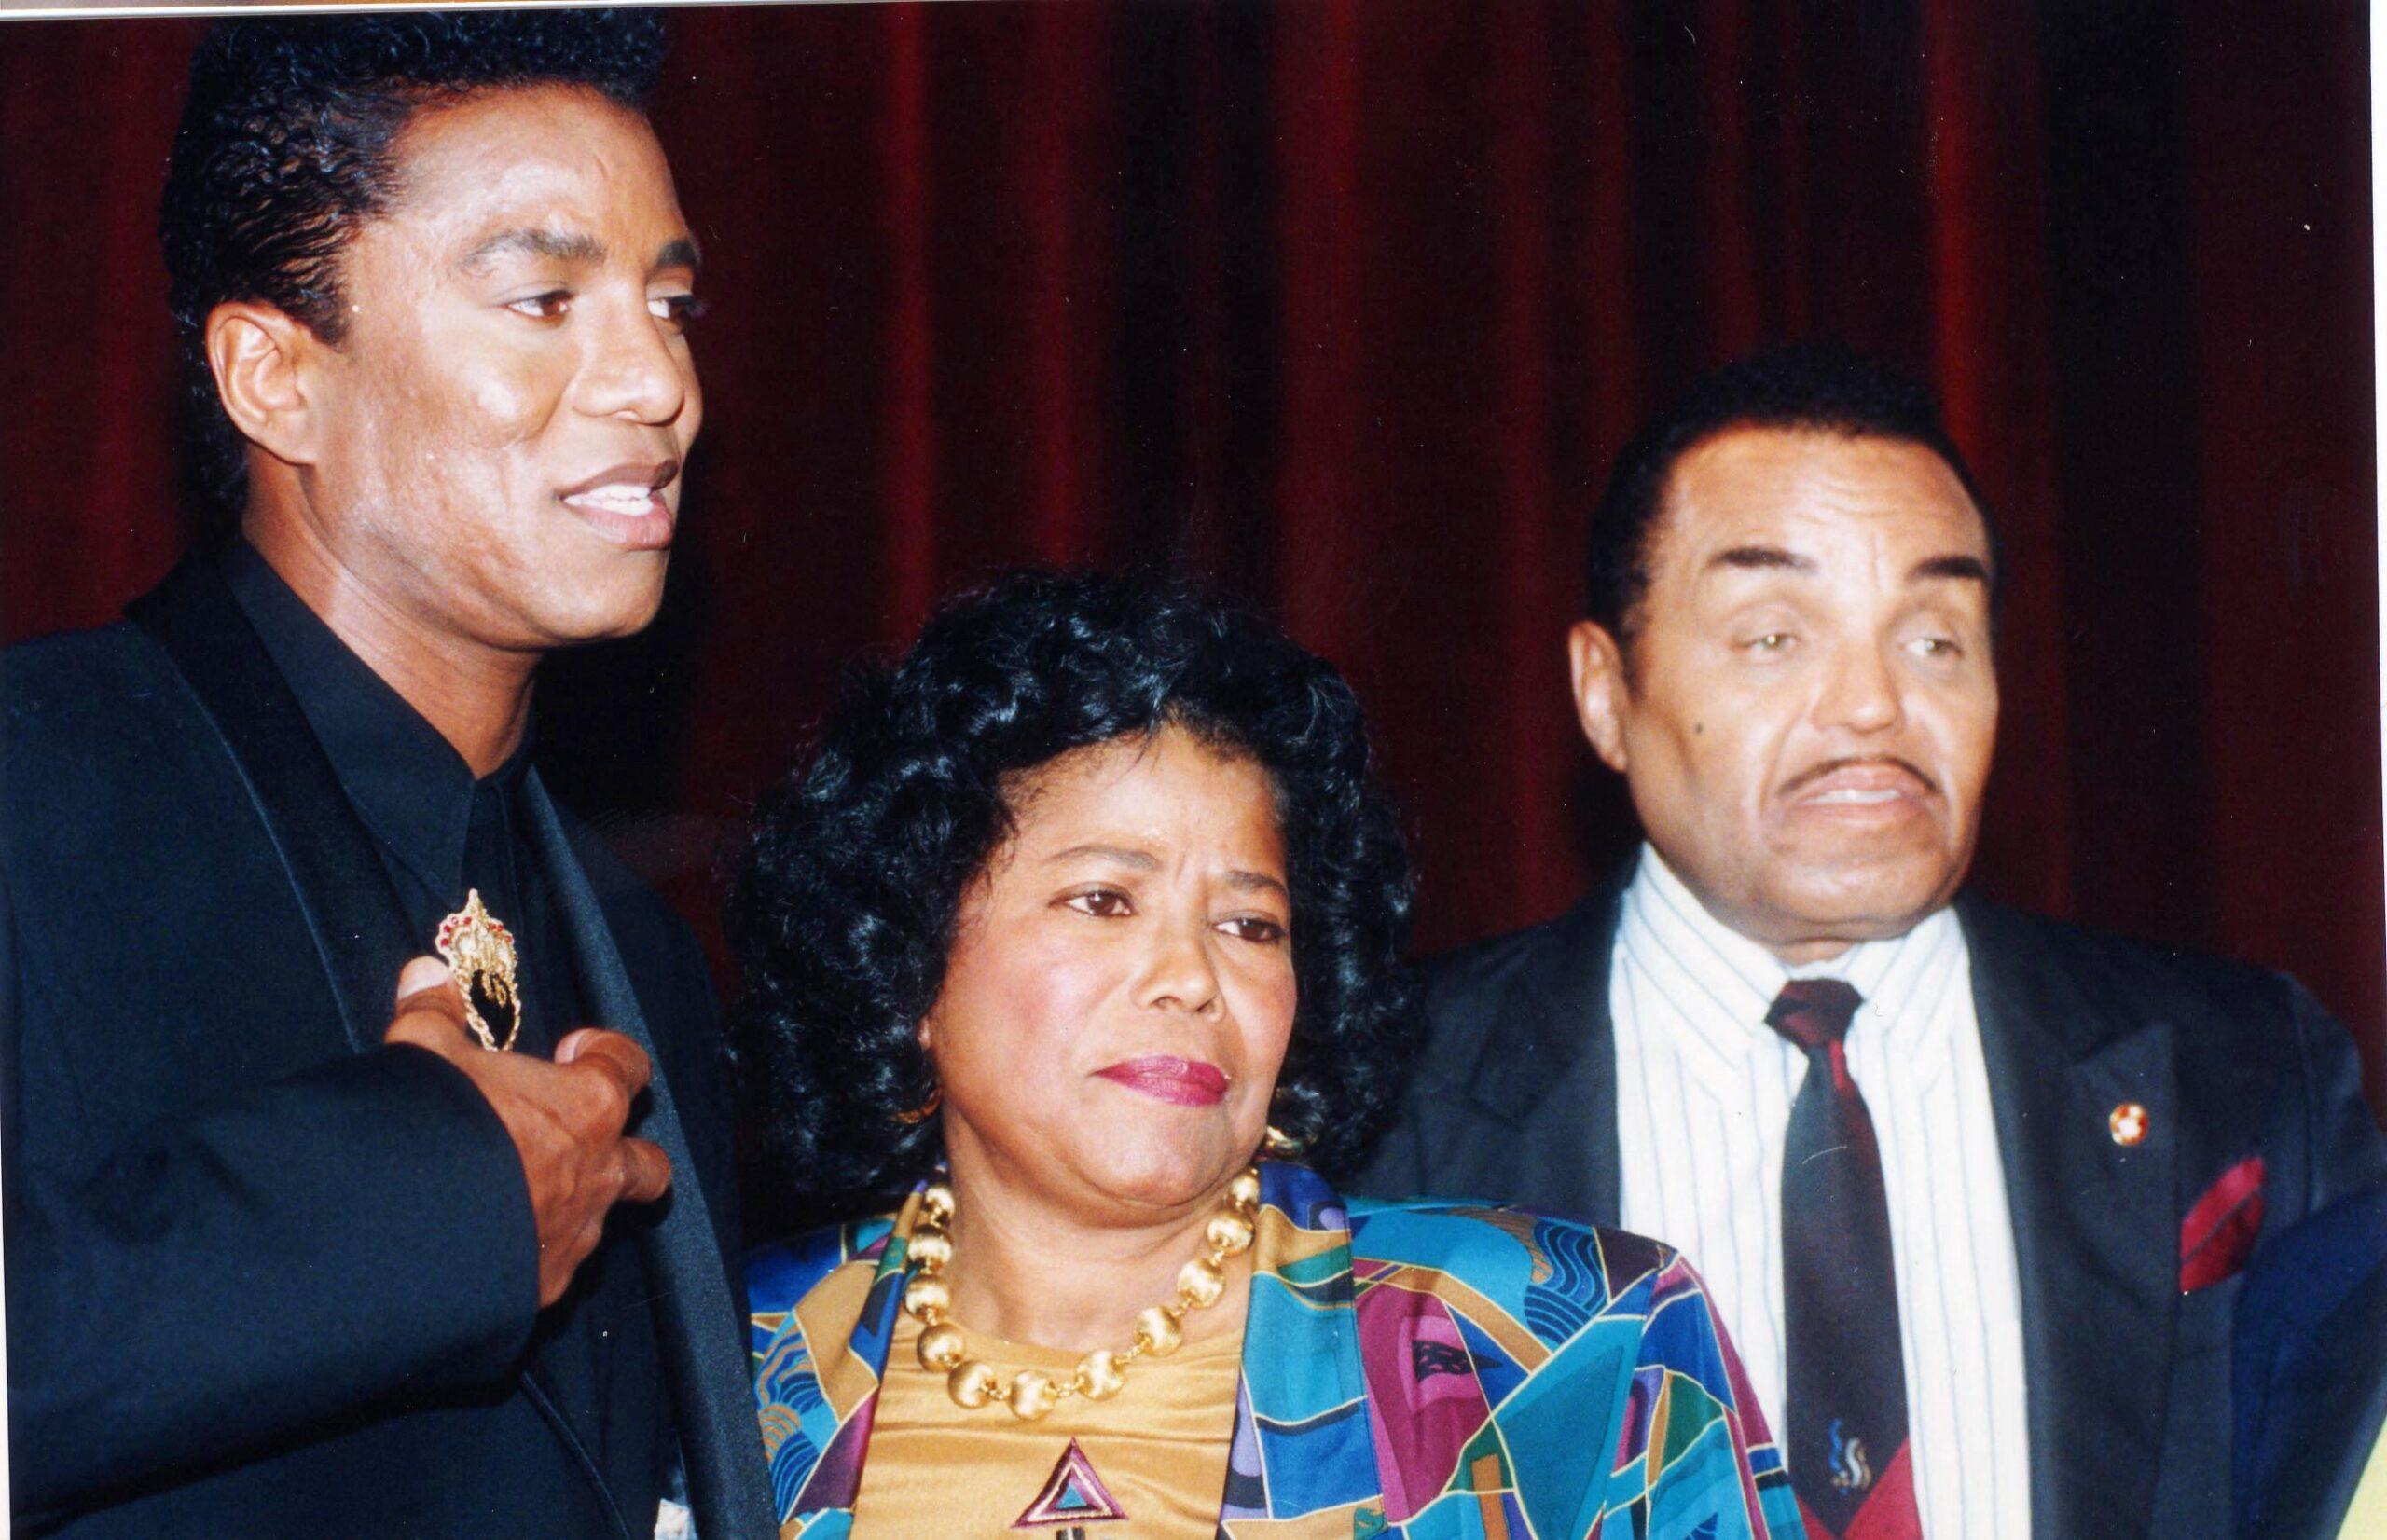 Katherine Jackson with her family in a press conference